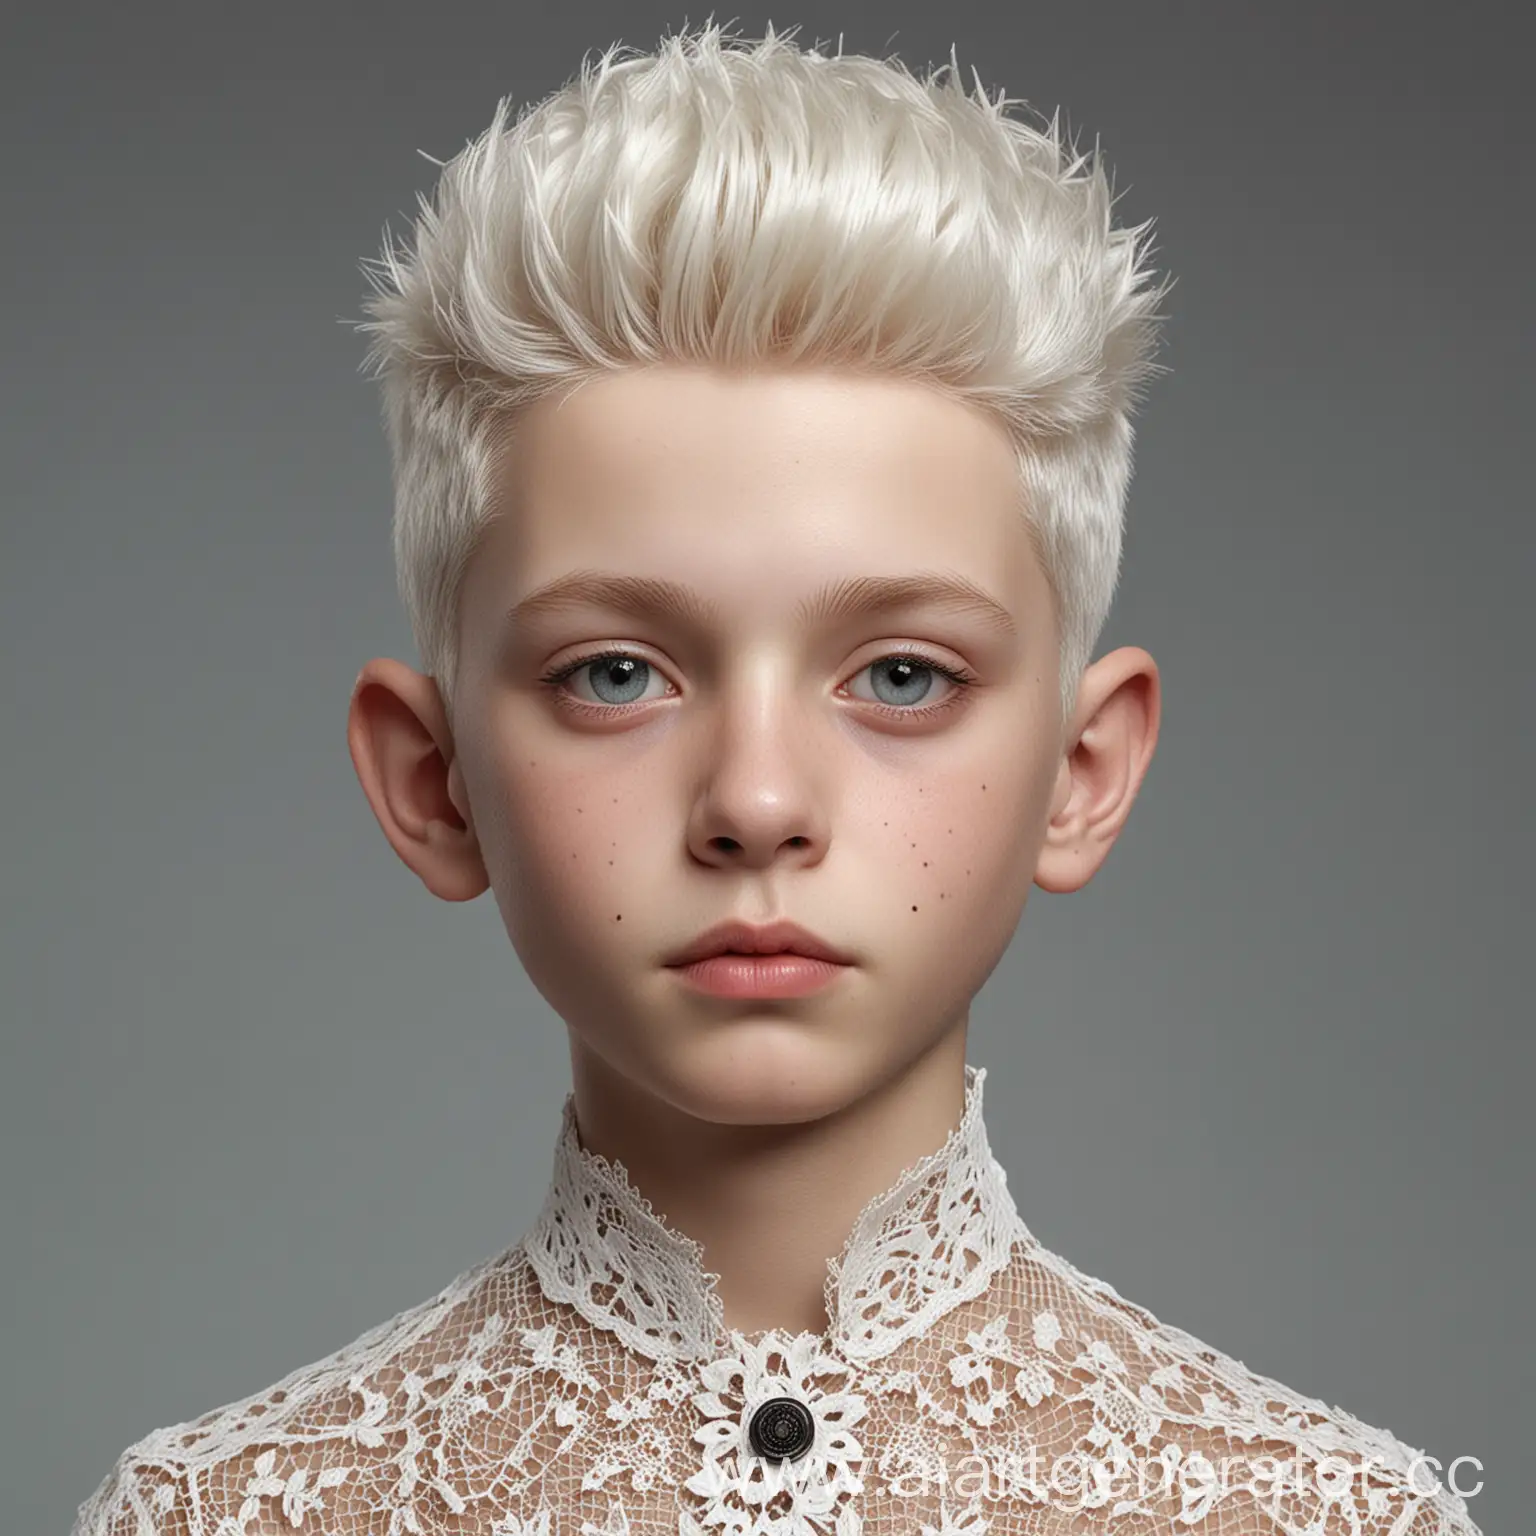 PorcelainLike-Young-Boy-with-Unique-Features-and-Dazzling-Eyes